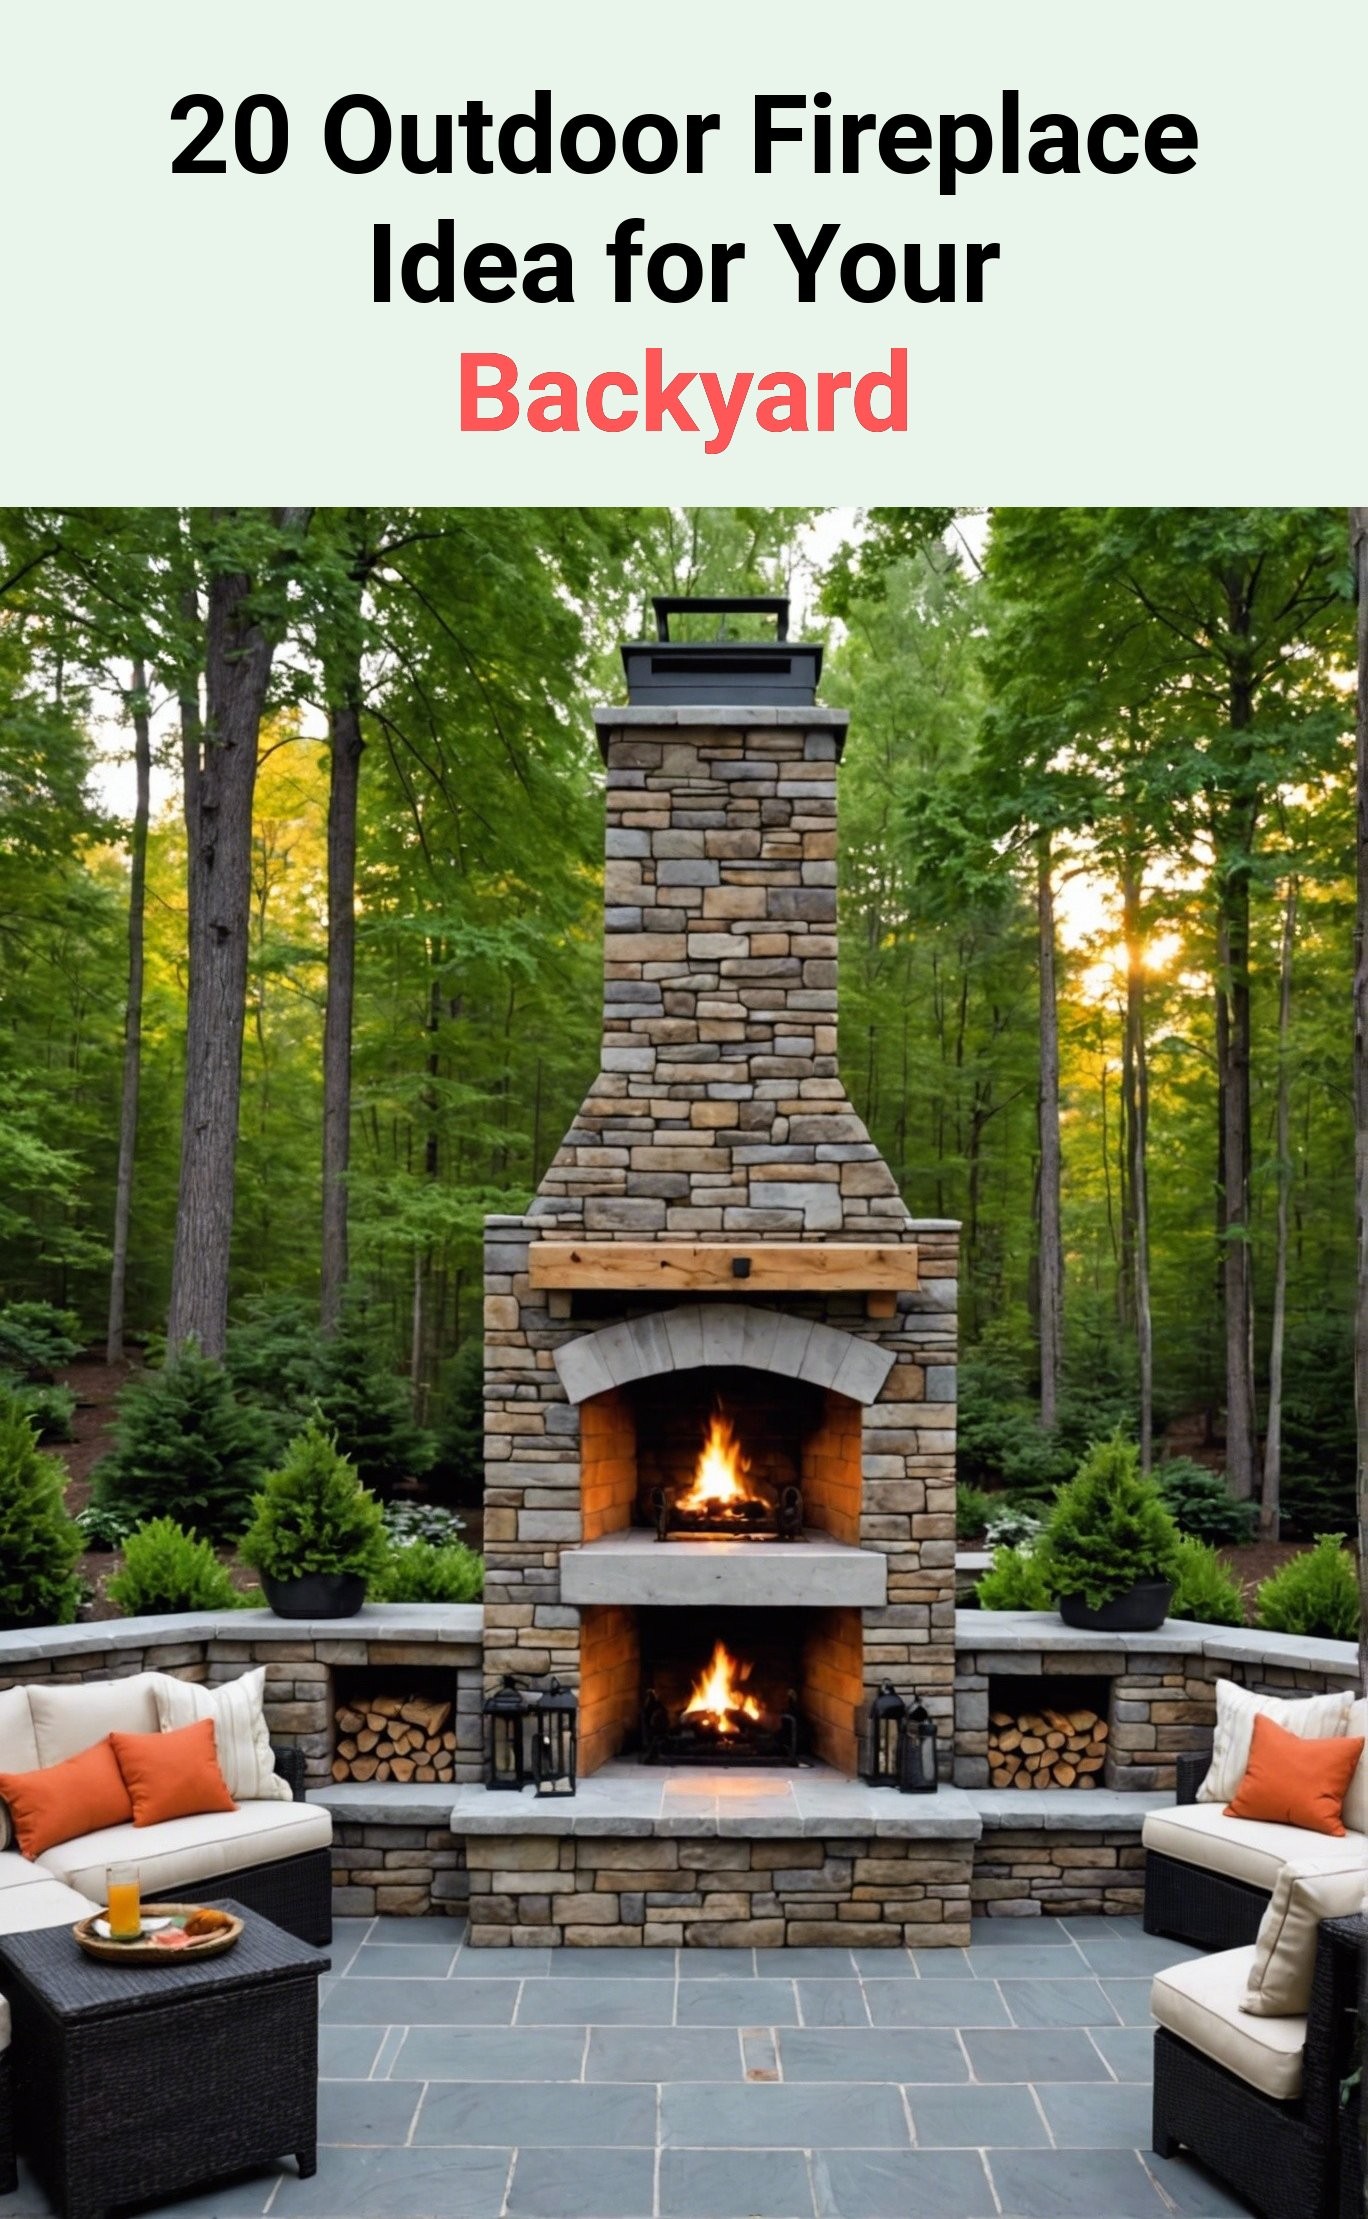 20 Outdoor Fireplace Idea for Your Backyard